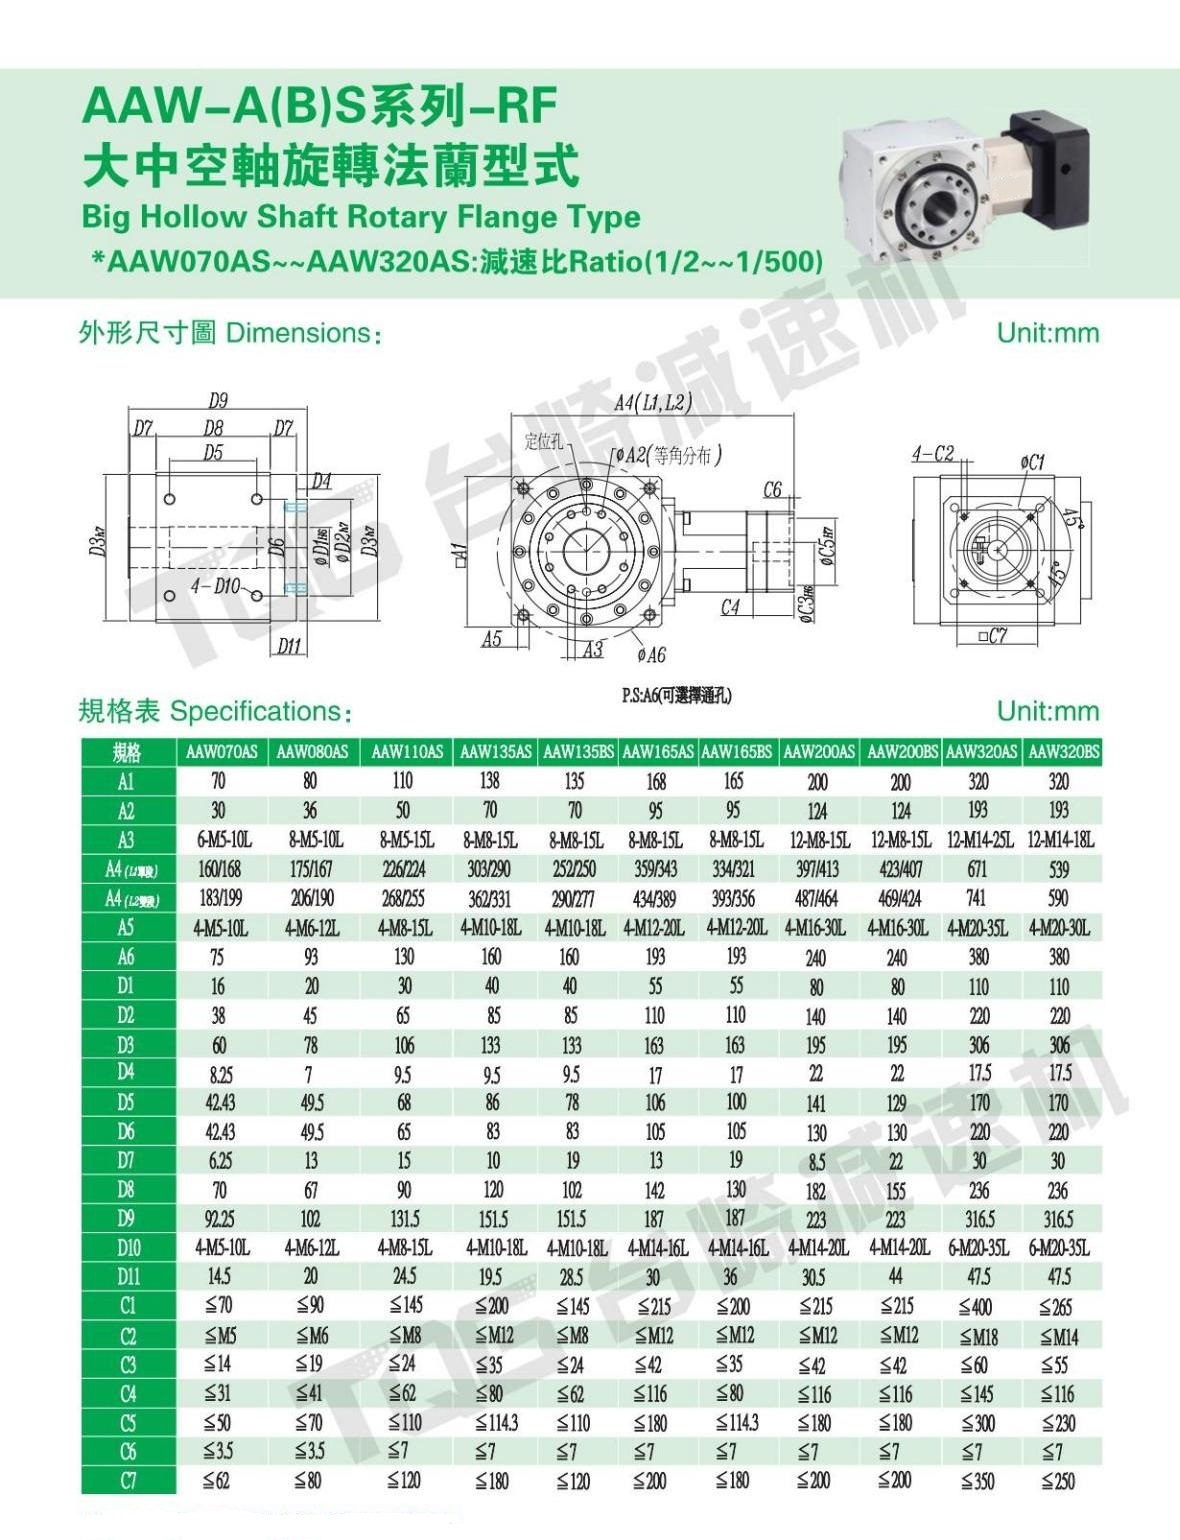 Right-Angle-Servo-Gearbox-AAW-ABS-RF